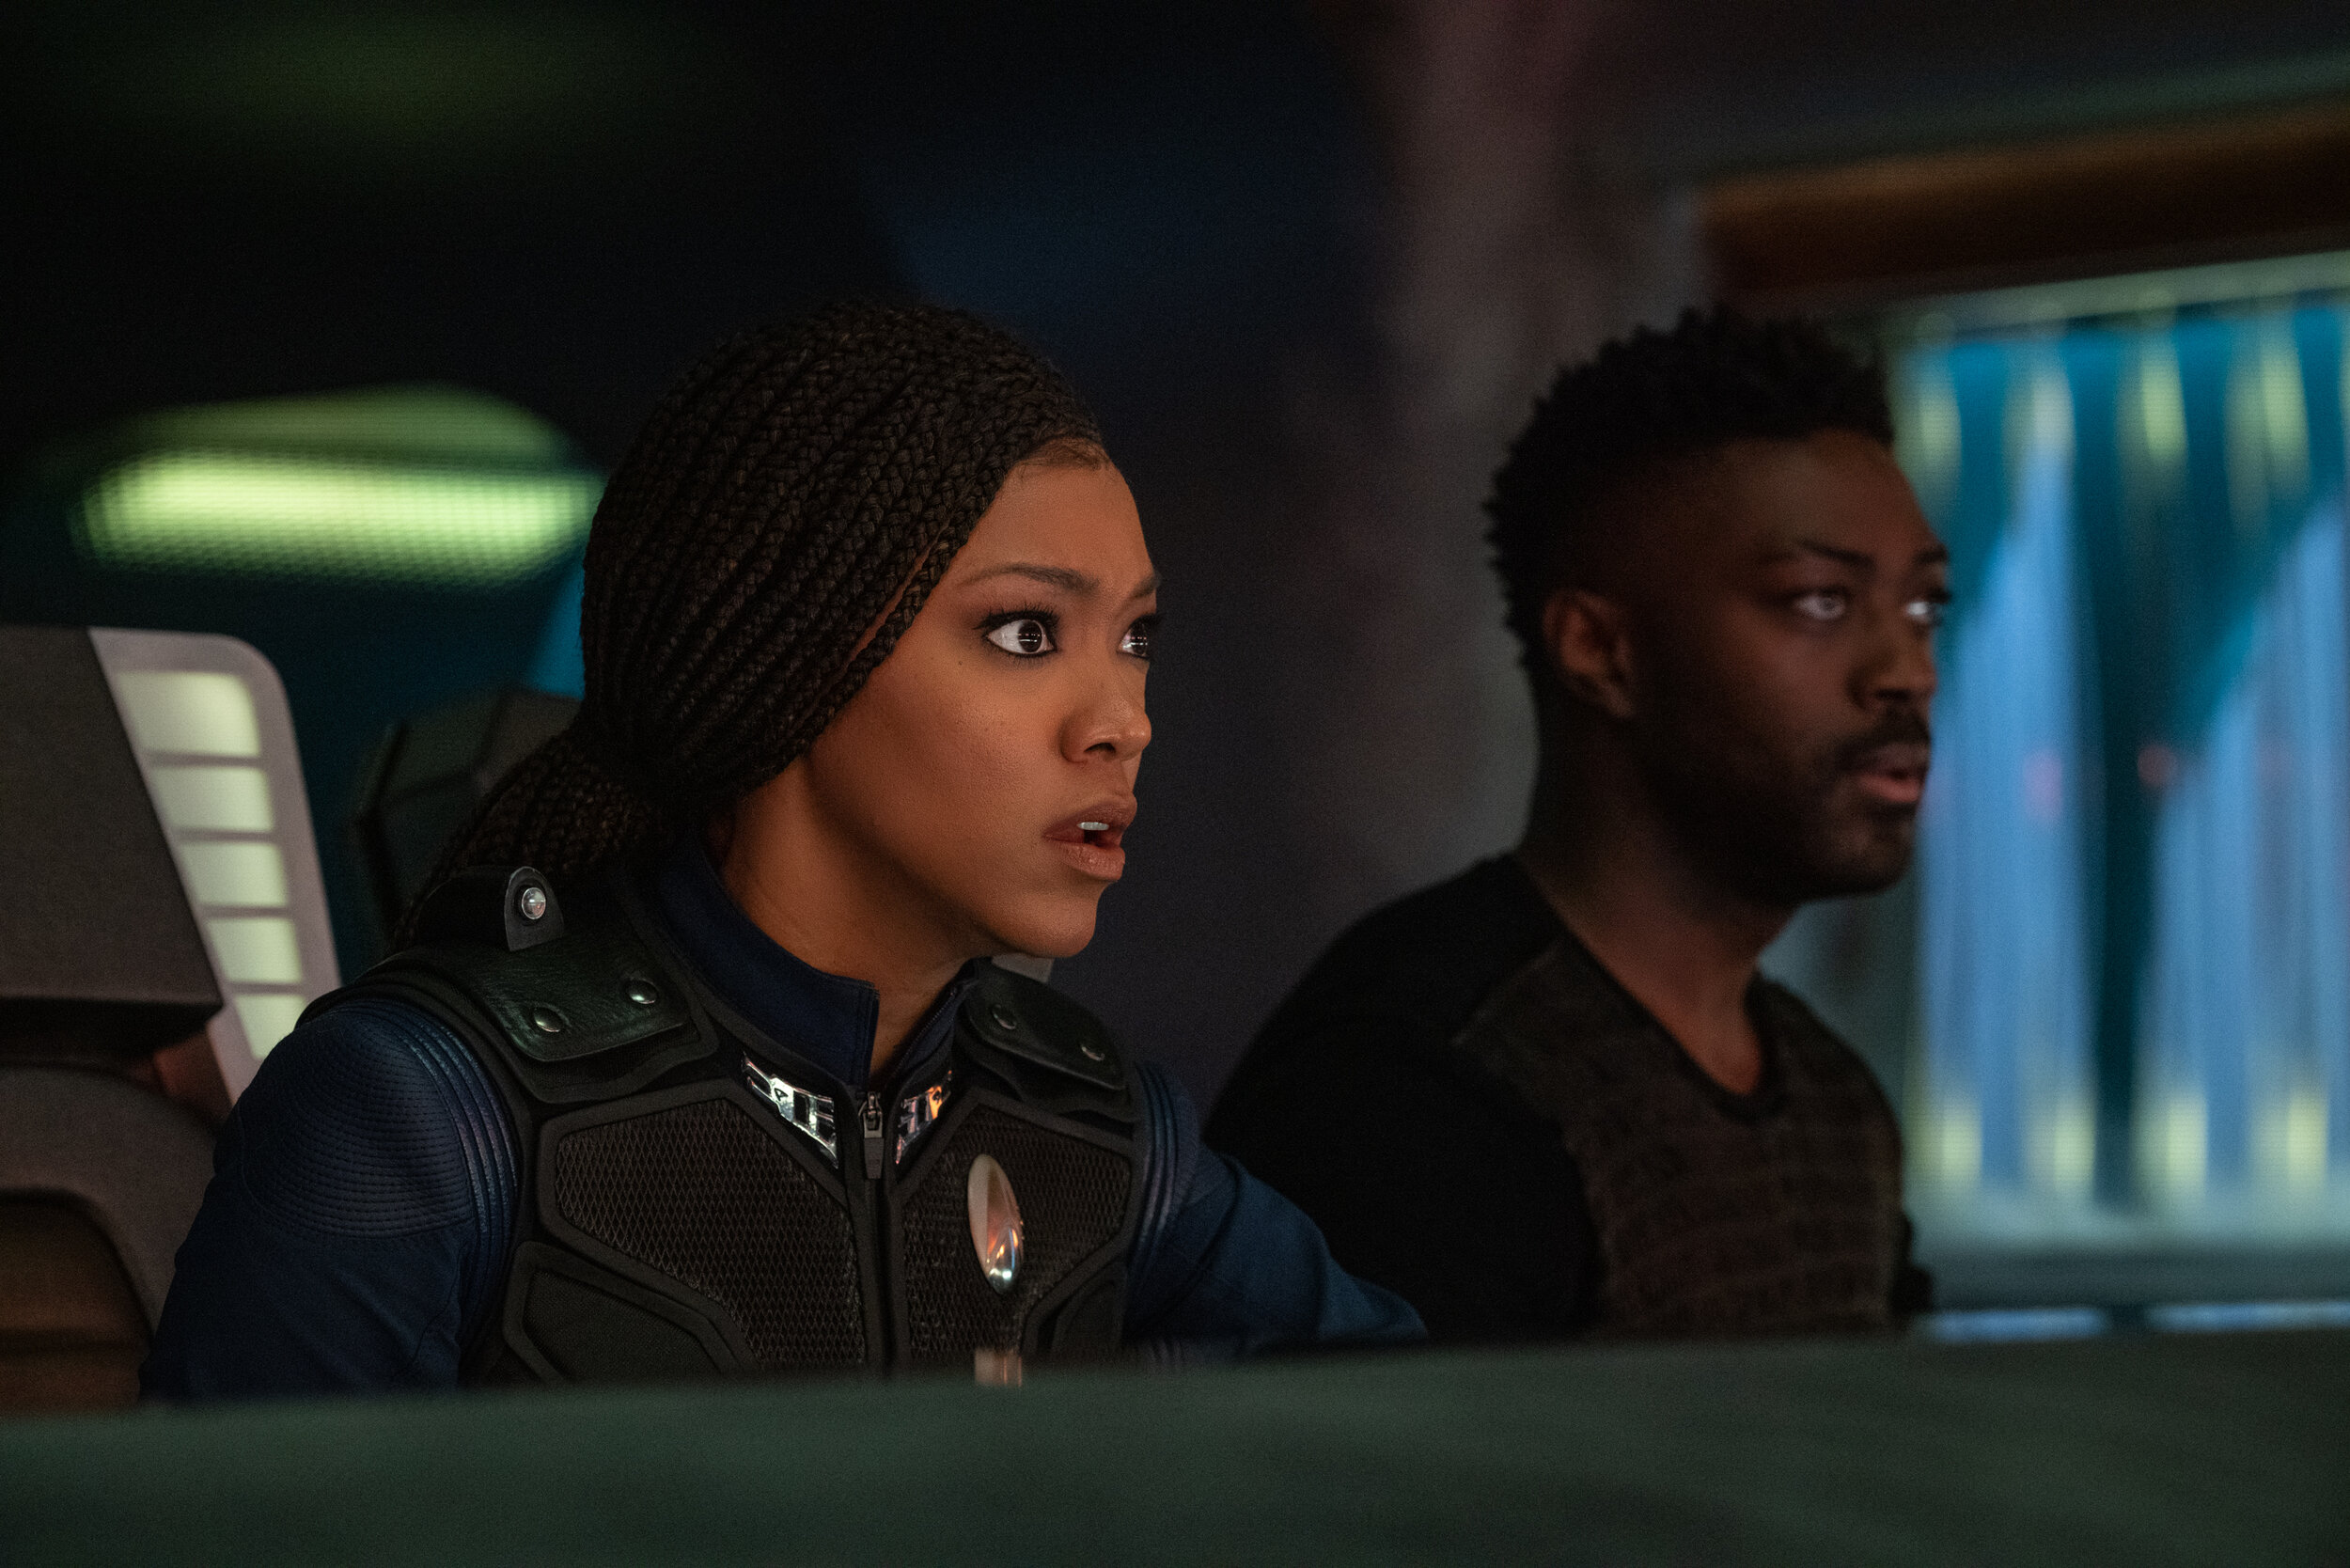   "There Is A Tide..." -- Ep#312 -- Pictured (L-R): Sonequa Martin-Green as Commander Burnham and David Ajala as Book of the CBS All Access series STAR TREK: DISCOVERY. Photo Cr: Michael Gibson/CBS ©2020 CBS Interactive, Inc. All Rights Reserved.  